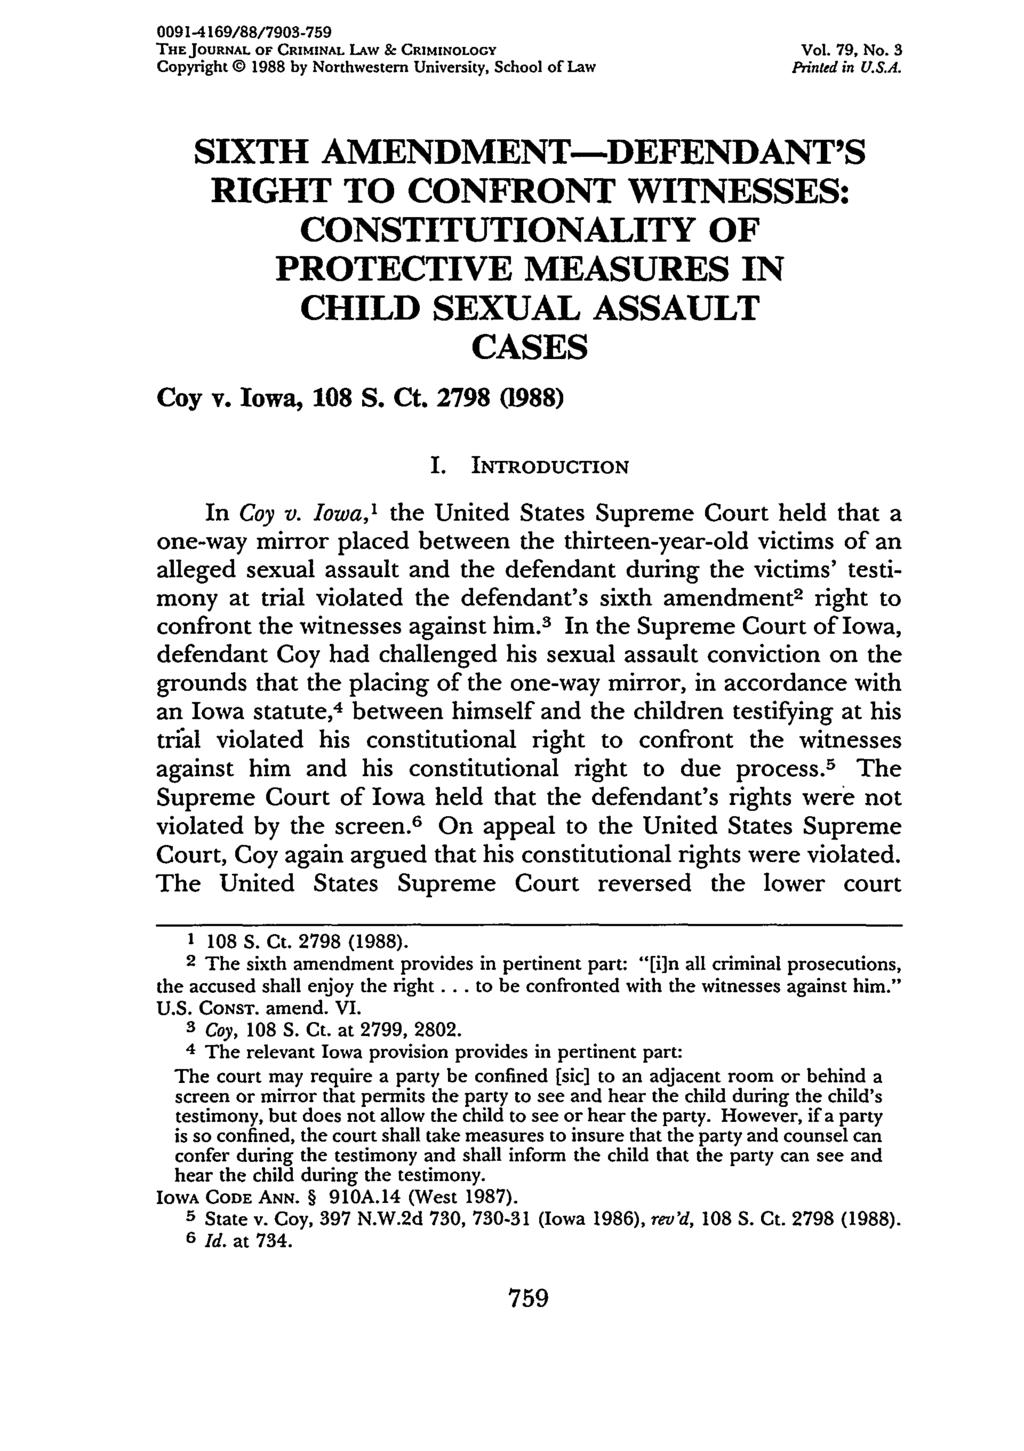 0091-4169/88/7903-759 THE JOURNAL OF CRIMINAL LAW & CRIMINOLOGY Vol. 79, No. 3 Copyright 0 1988 by Northwestern University, School of Law Printed in U.S.A. SIXTH AMENDMENT-DEFENDANT'S RIGHT TO CONFRONT WITNESSES: CONSTITUTIONALITY OF PROTECTIVE MEASURES IN CHILD SEXUAL ASSAULT CASES Coy v.